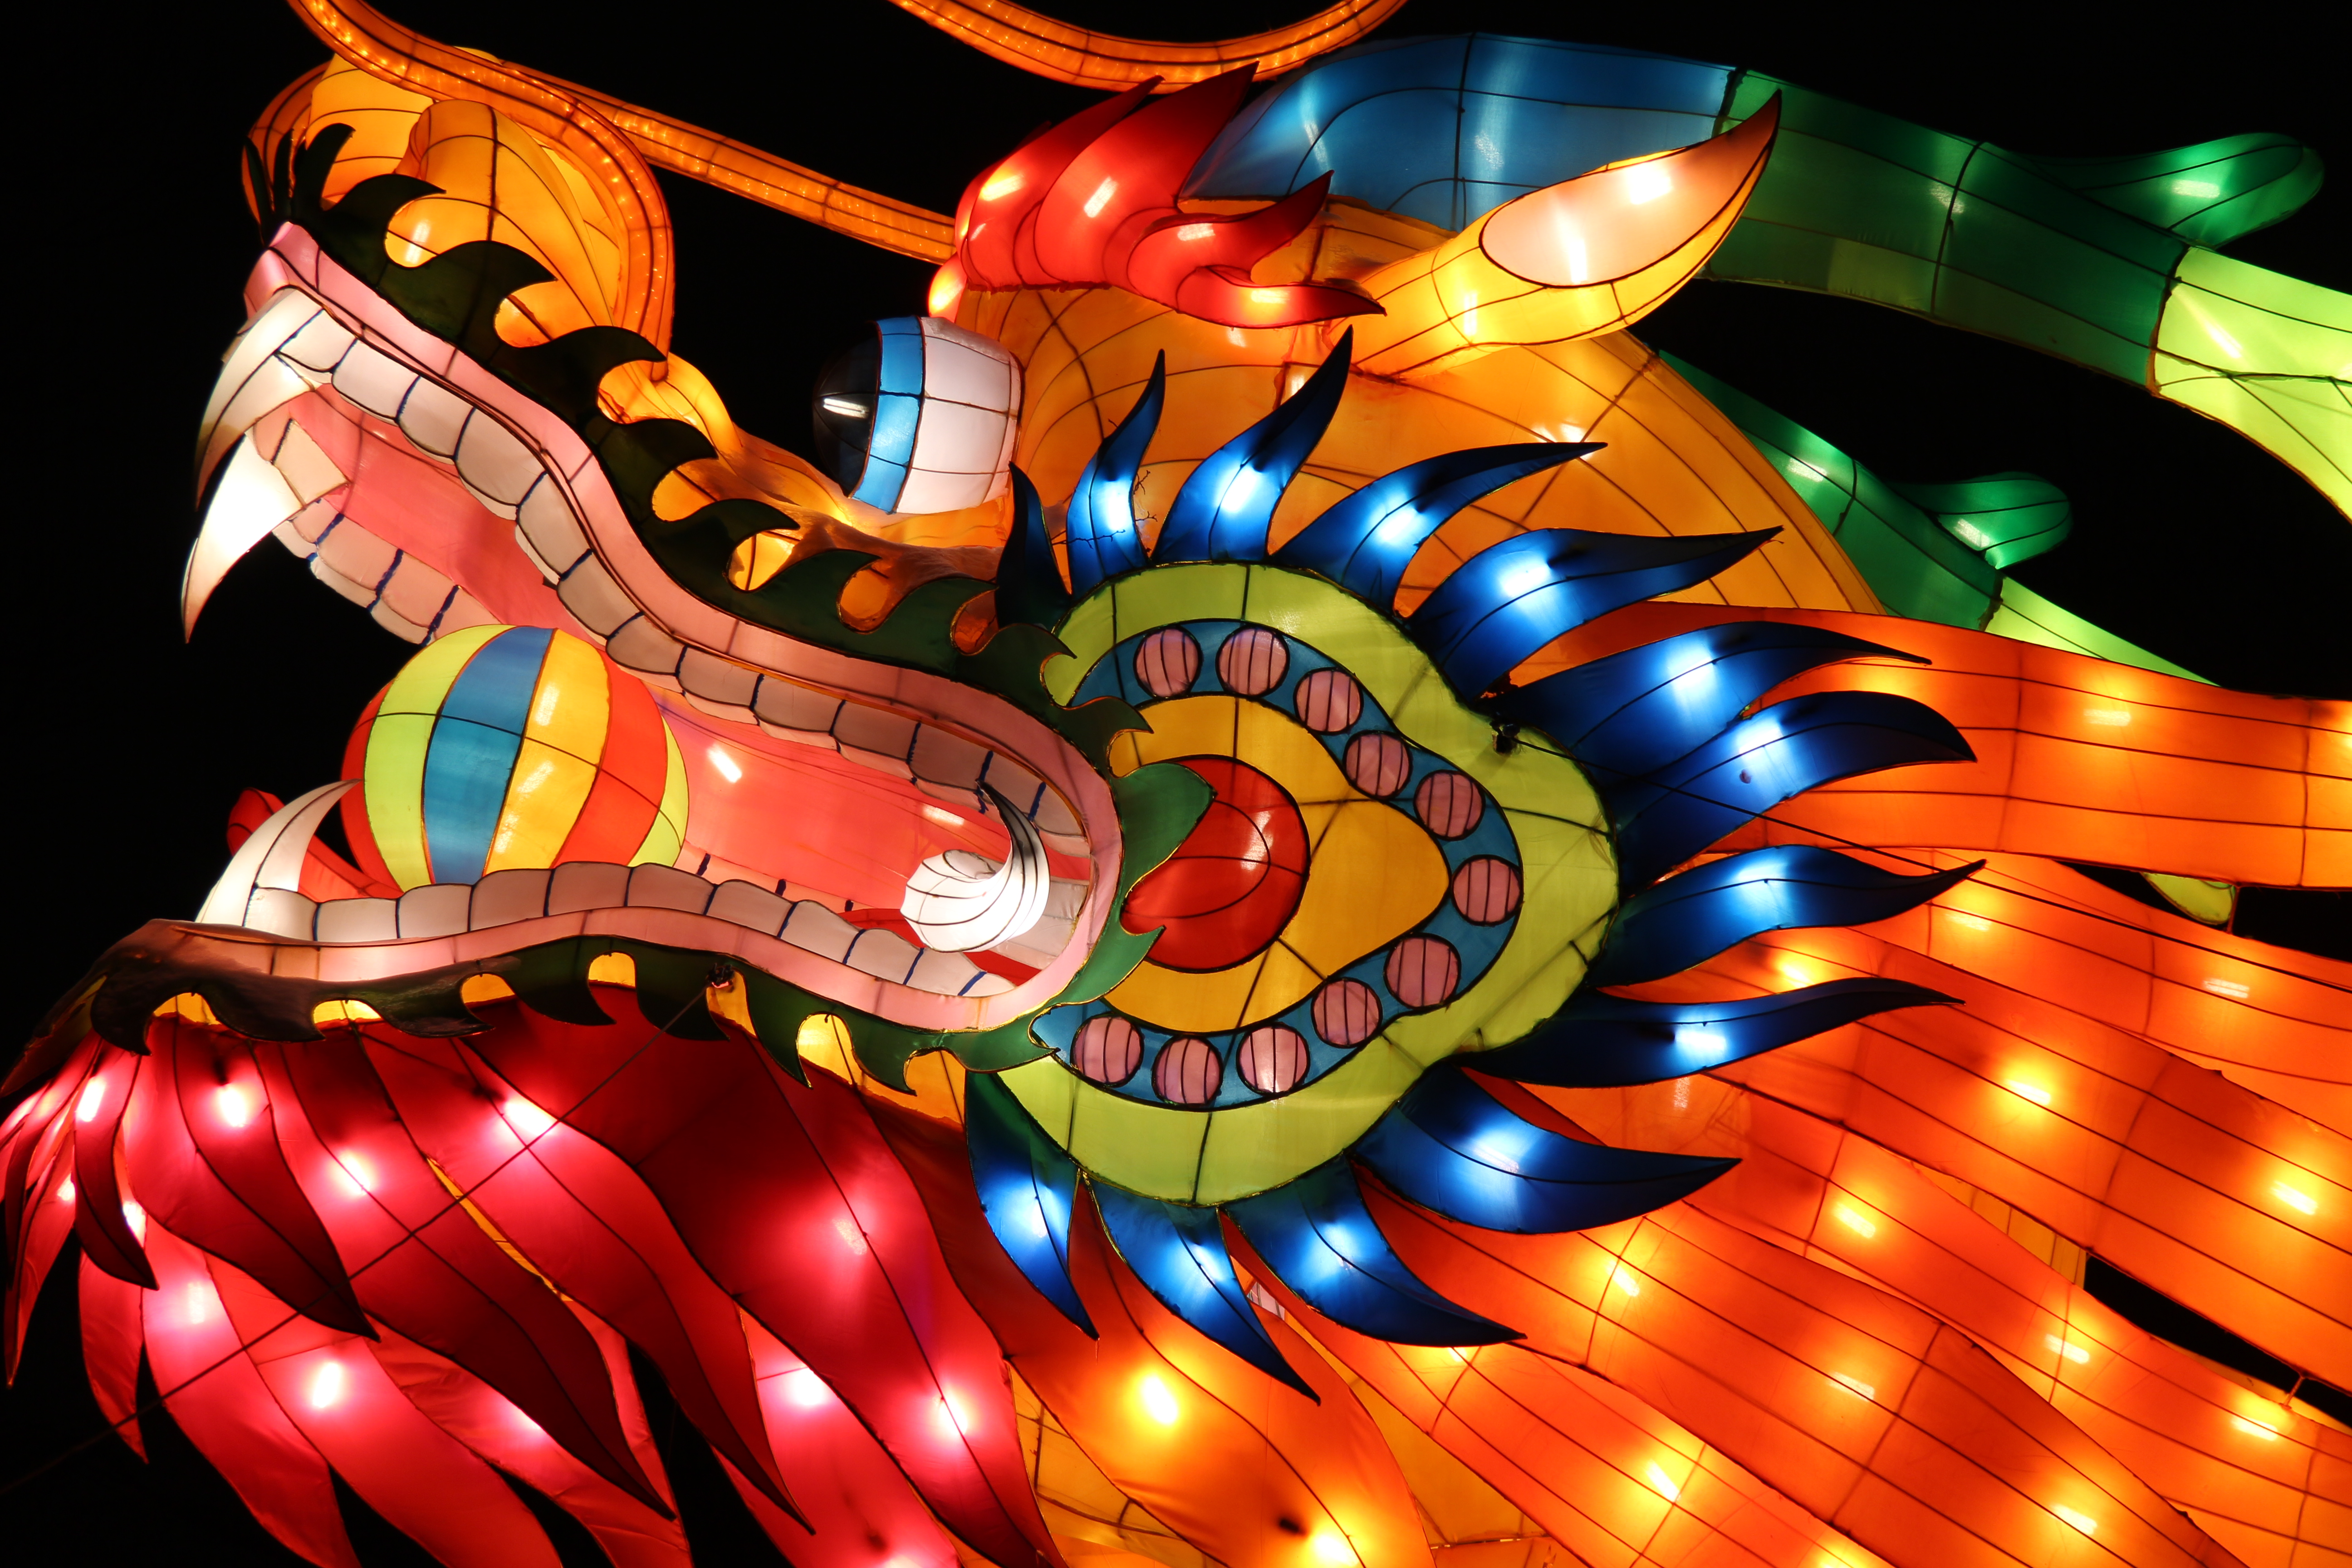 Chinese New Year in the Philippines | Asia Society